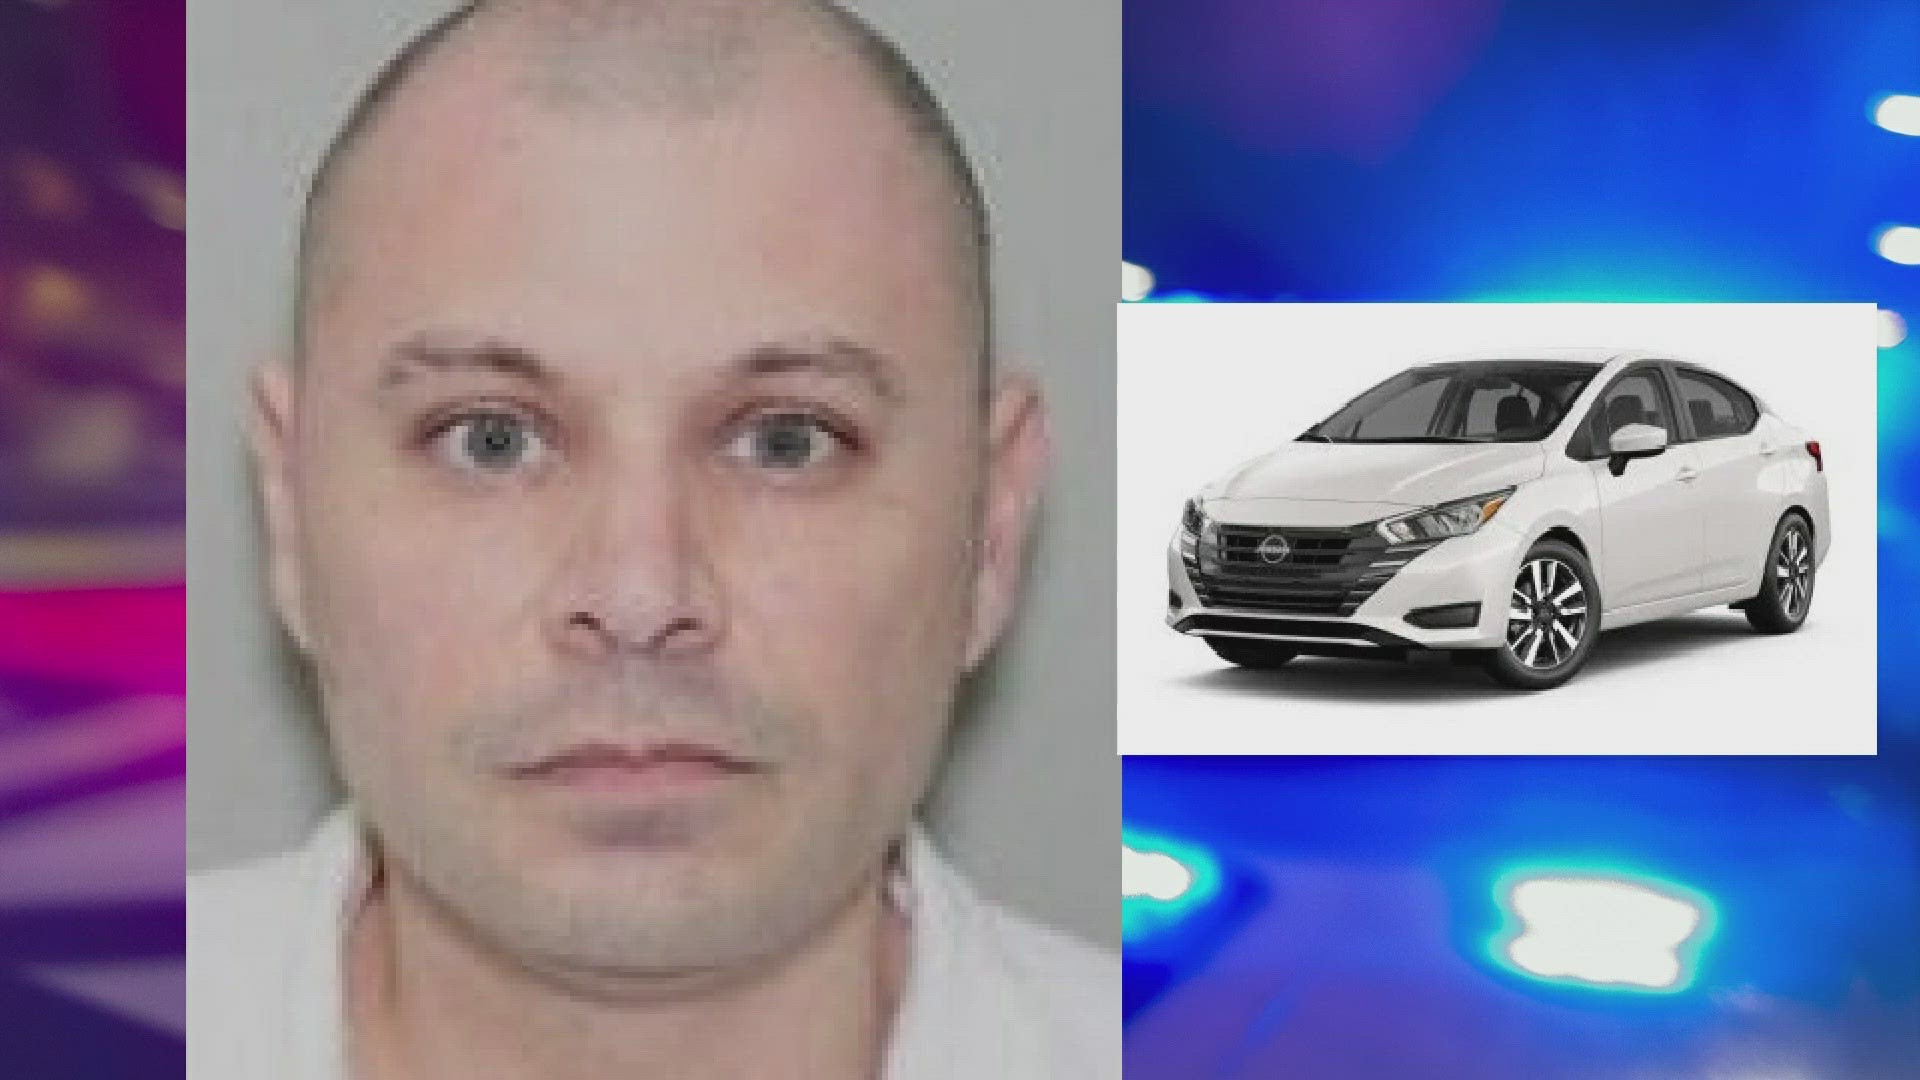 Authorities said he was last seen in a 2021 white Nissan Versa with a license plate number DNR9145.